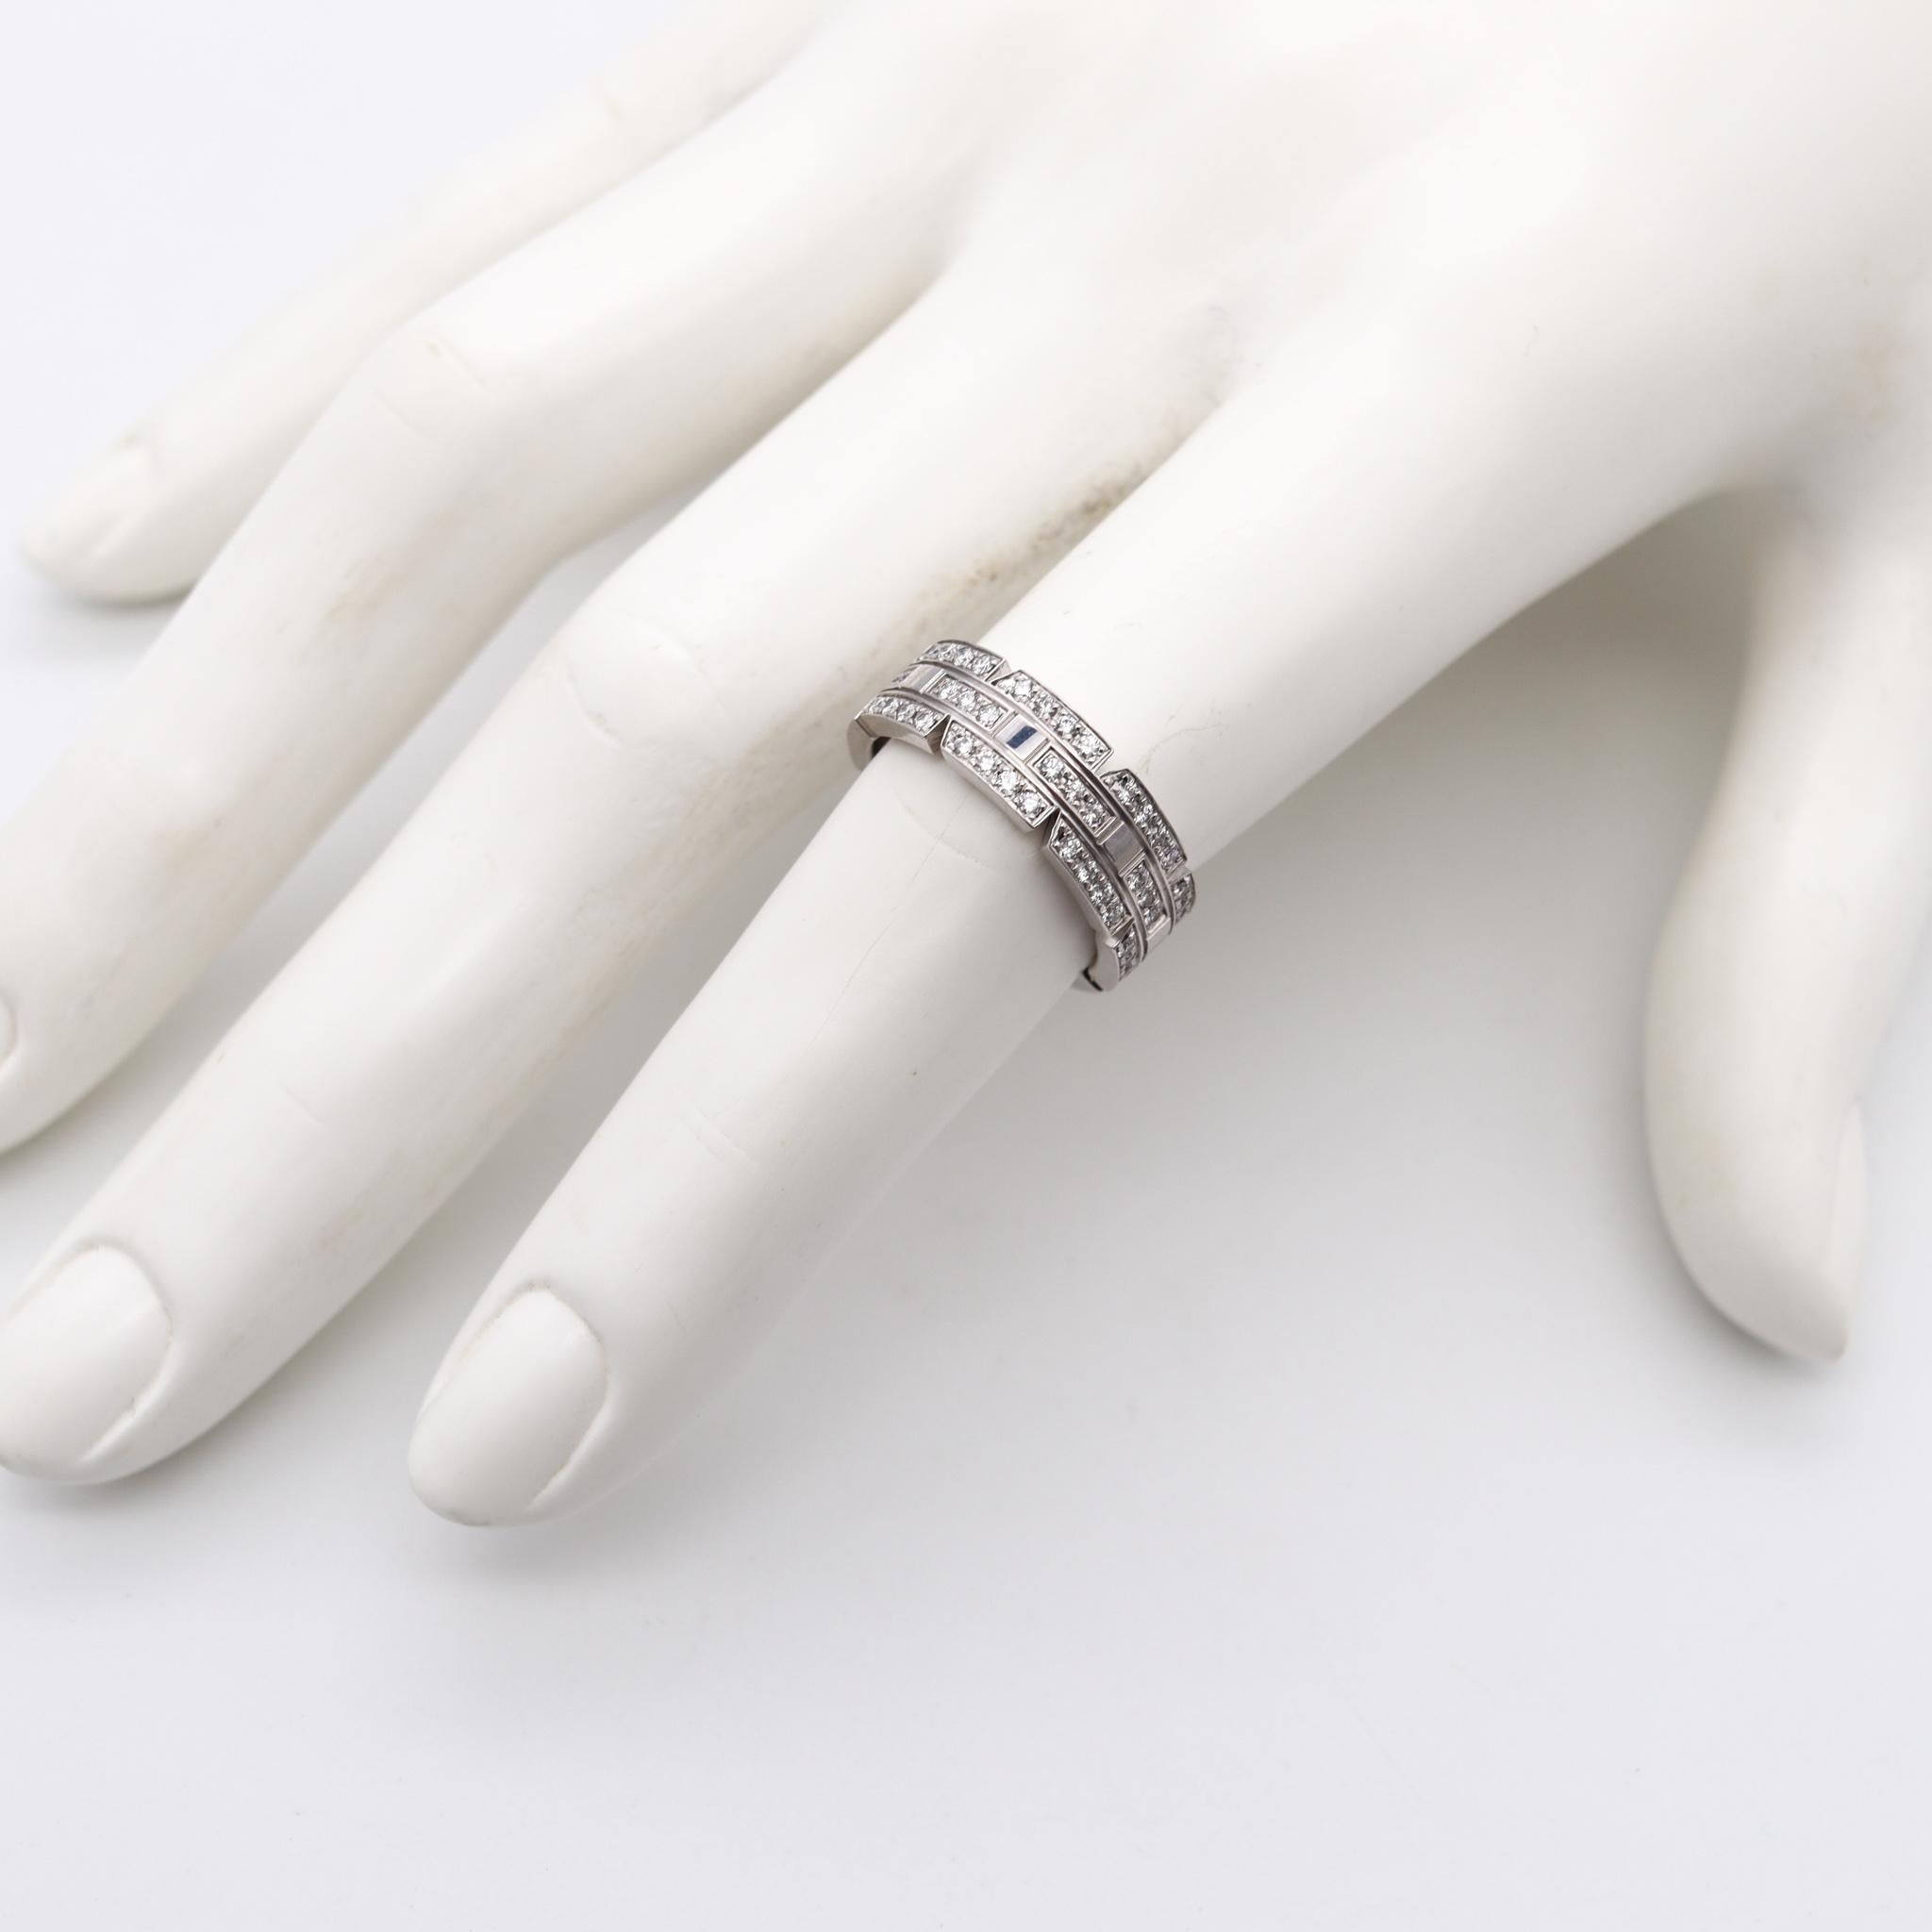 Maillon Panthere ring with diamonds designed by Cartier.

A classic modern piece, created in Paris France by the house of Cartier. This iconic ring is part of the popular maillon panthere collection, crafted in solid white gold of 18 karats with